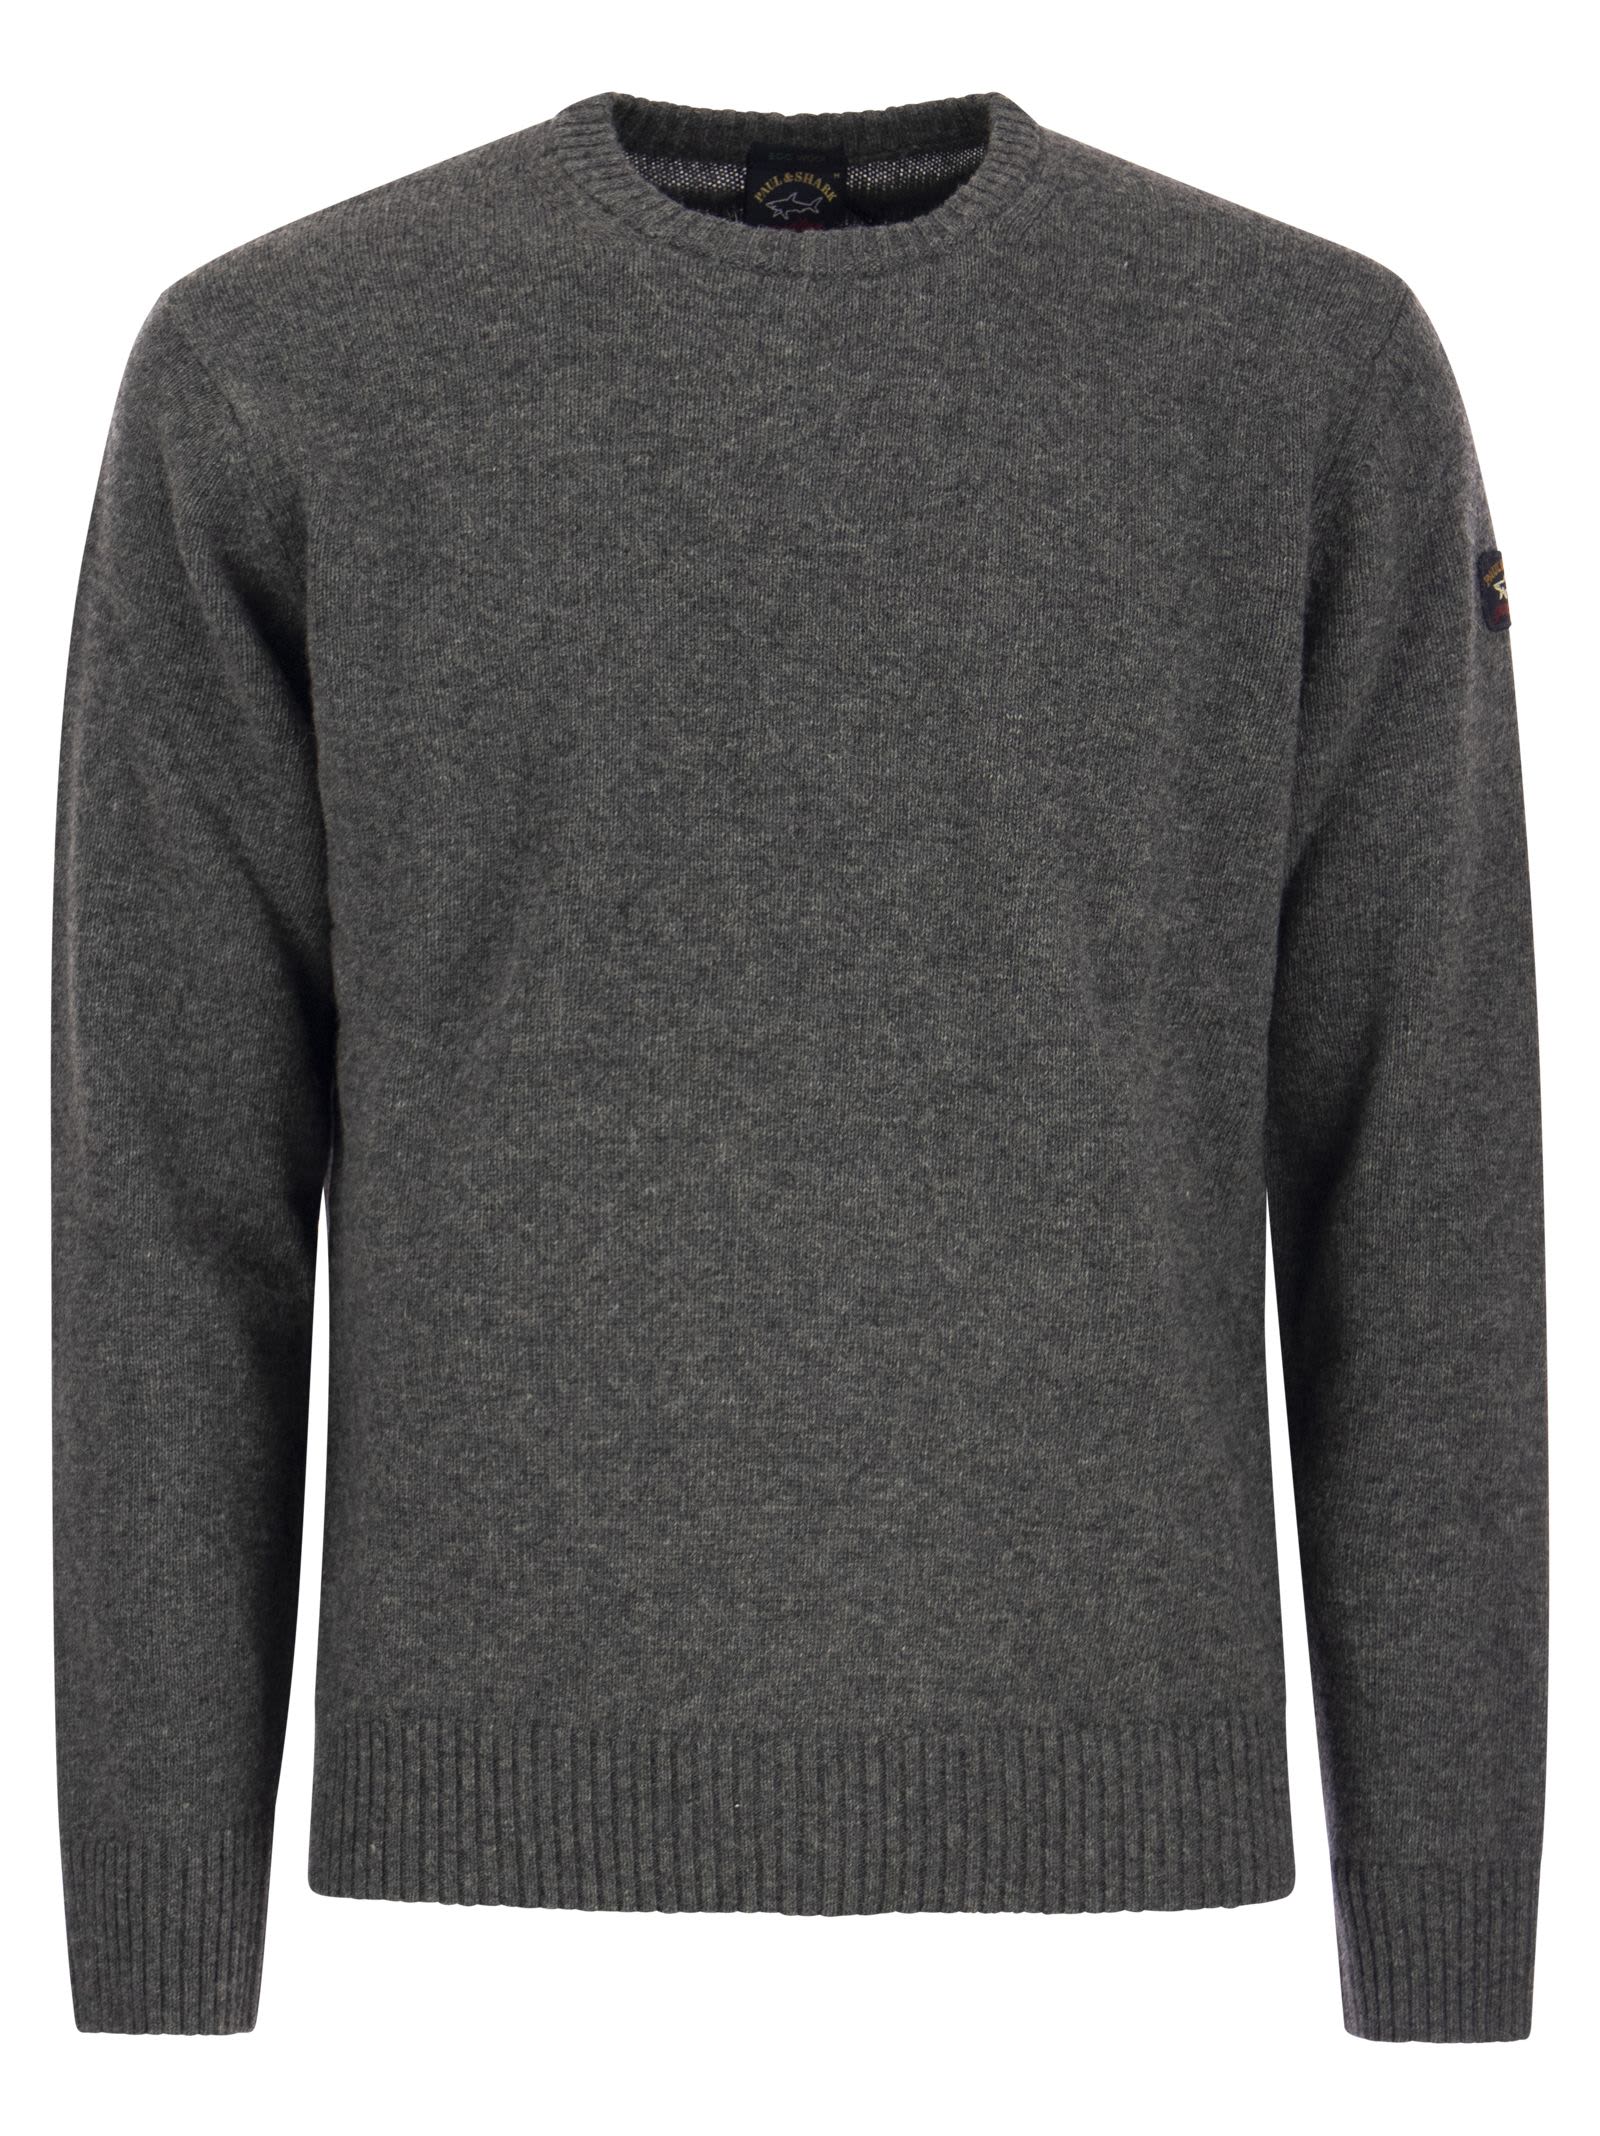 Paul&amp;shark Wool Crew Neck With Arm Patch In Grey